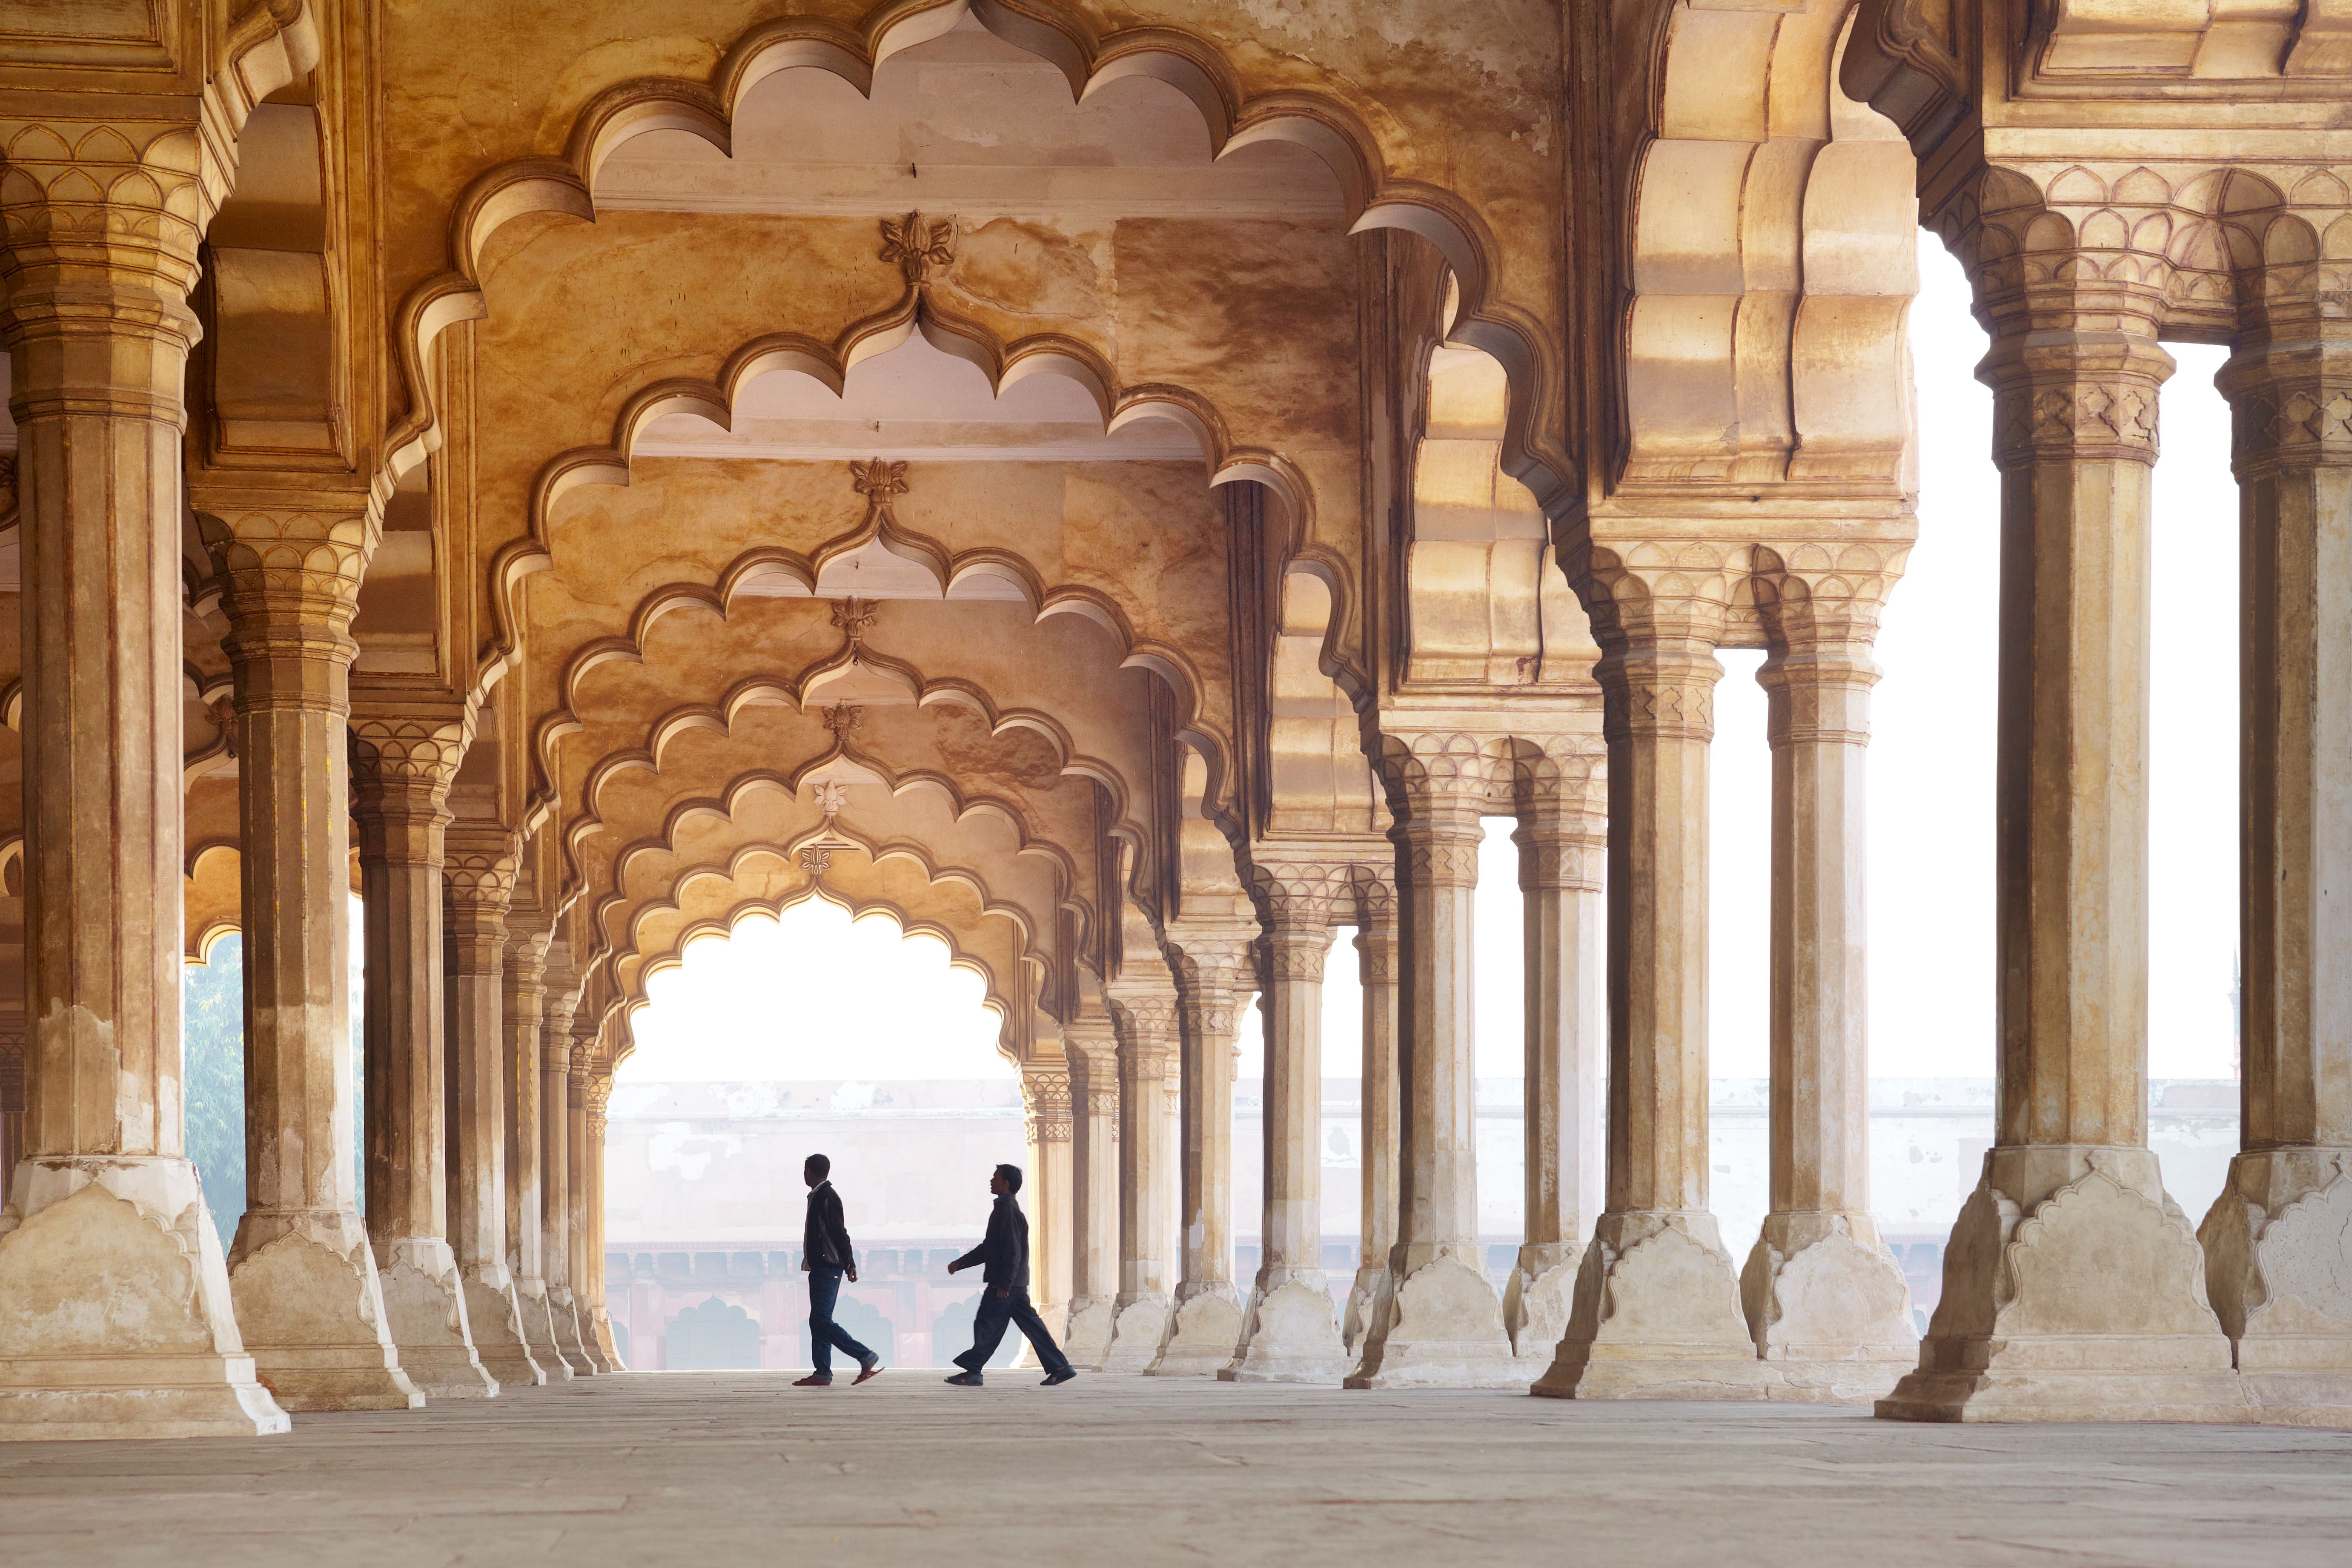 Hall of public audience at Agra Fort. Photo: Alamy